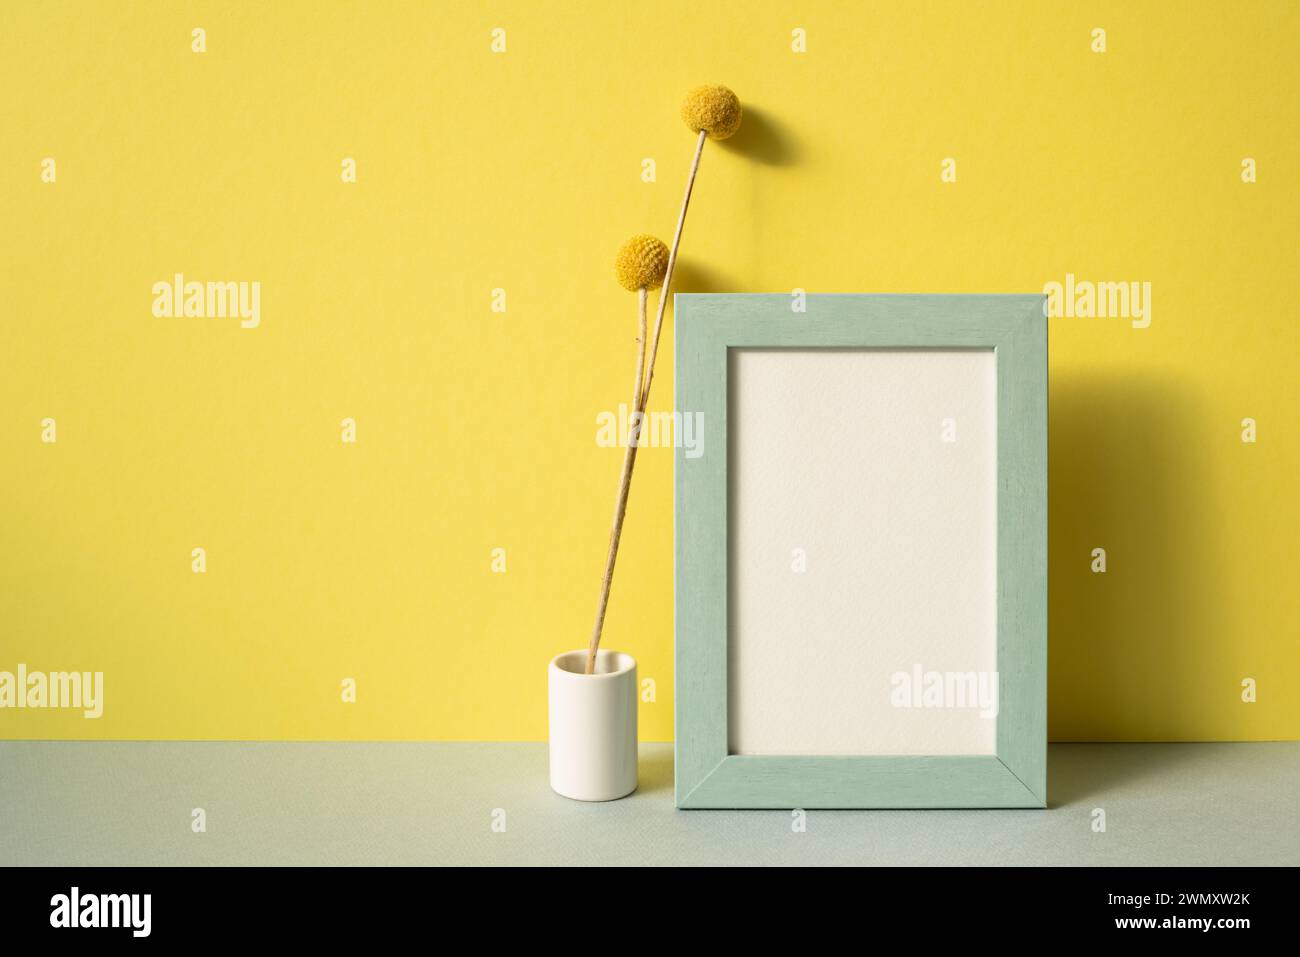 Photo frame with vase of dry flower on gray shelf. yellow wall background Stock Photo